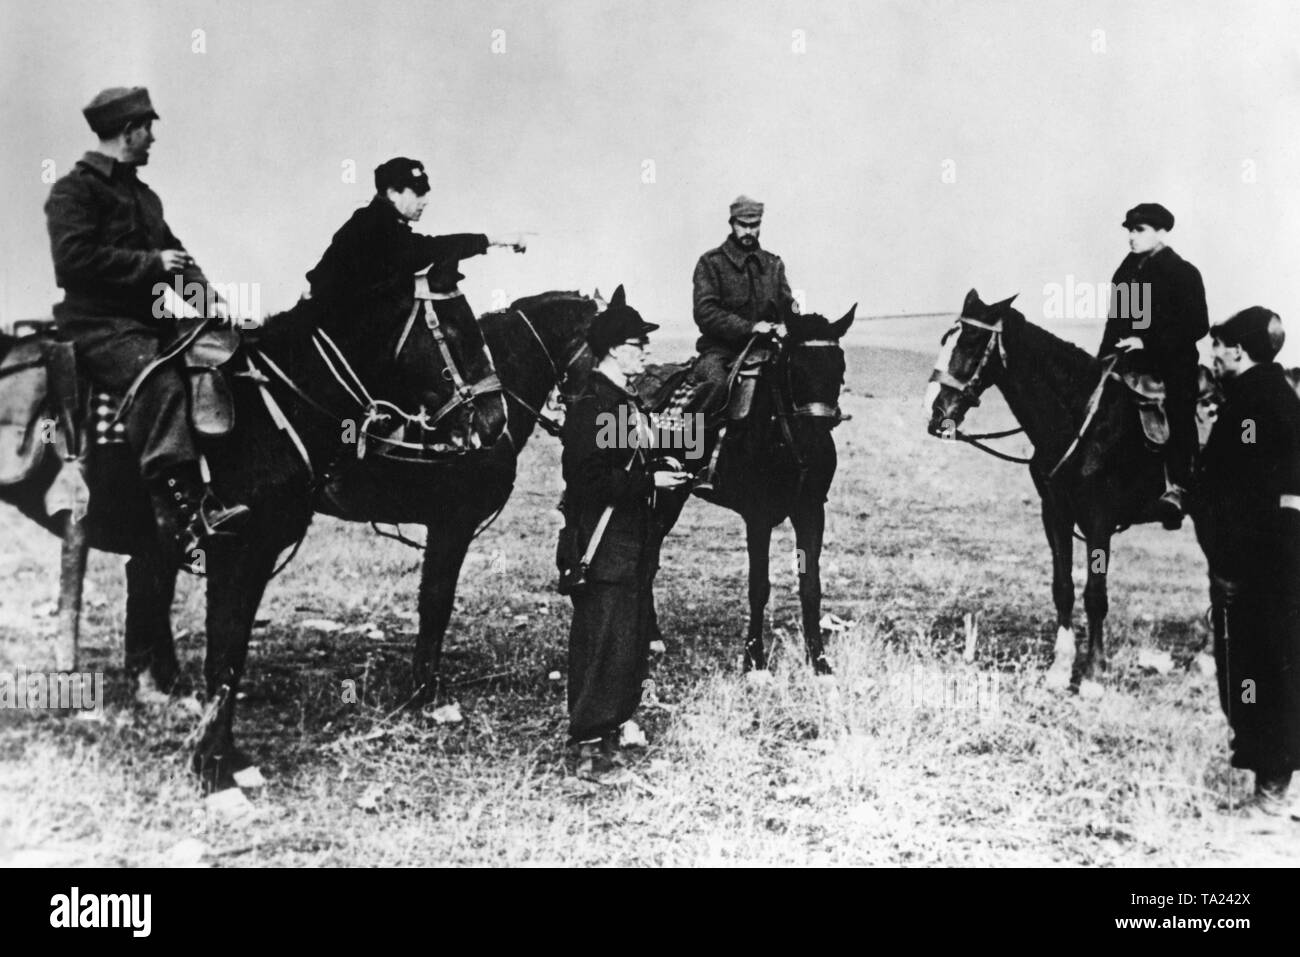 Photo of six Republican soldiers (four on horseback) of an unknown batallion of the International Brigade on the Teruel Front during the Spanish Civil War in Spain, 1937. Stock Photo